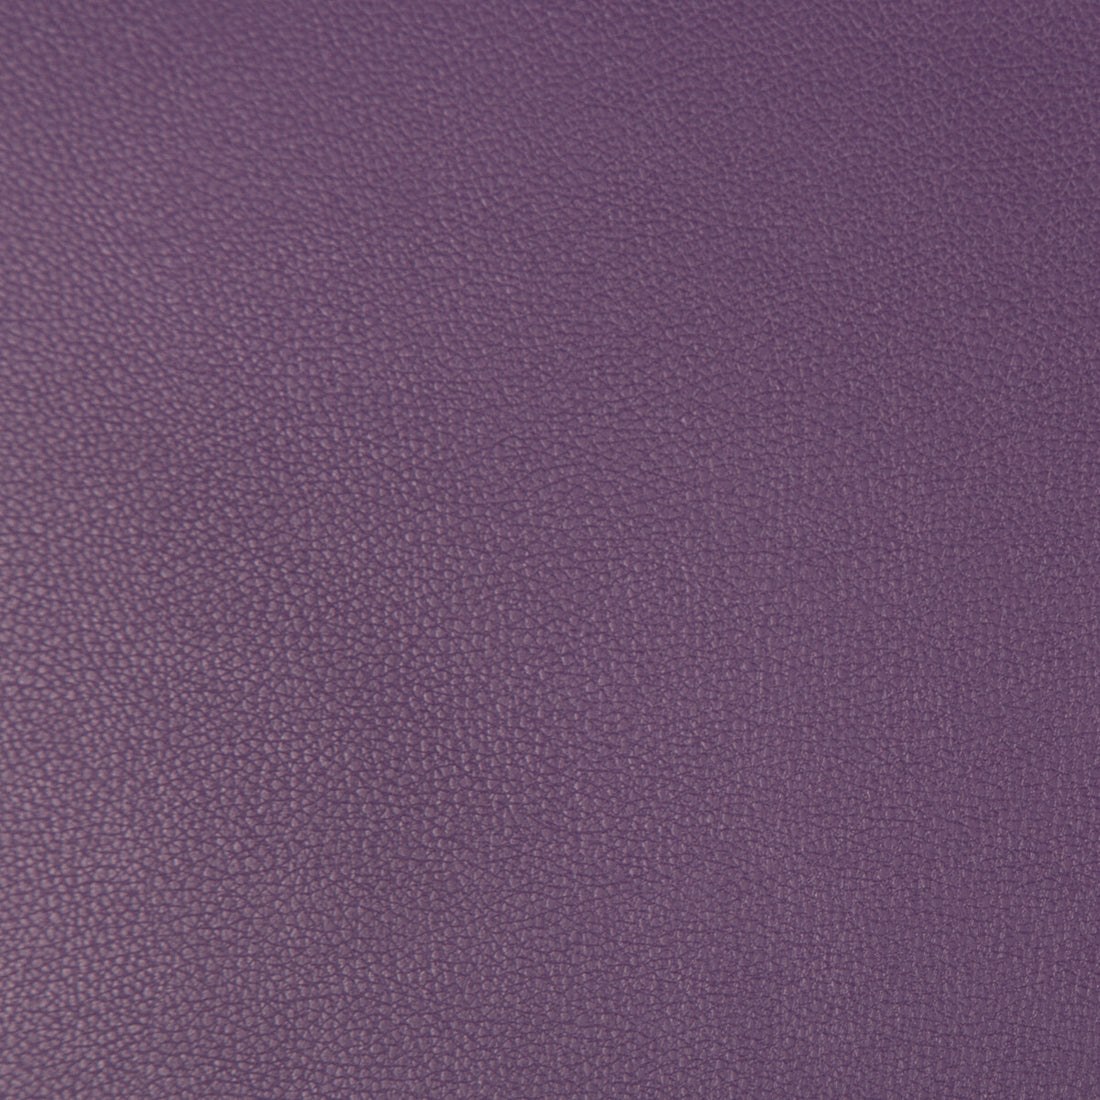 Syrus fabric in grape color - pattern SYRUS.10.0 - by Kravet Contract